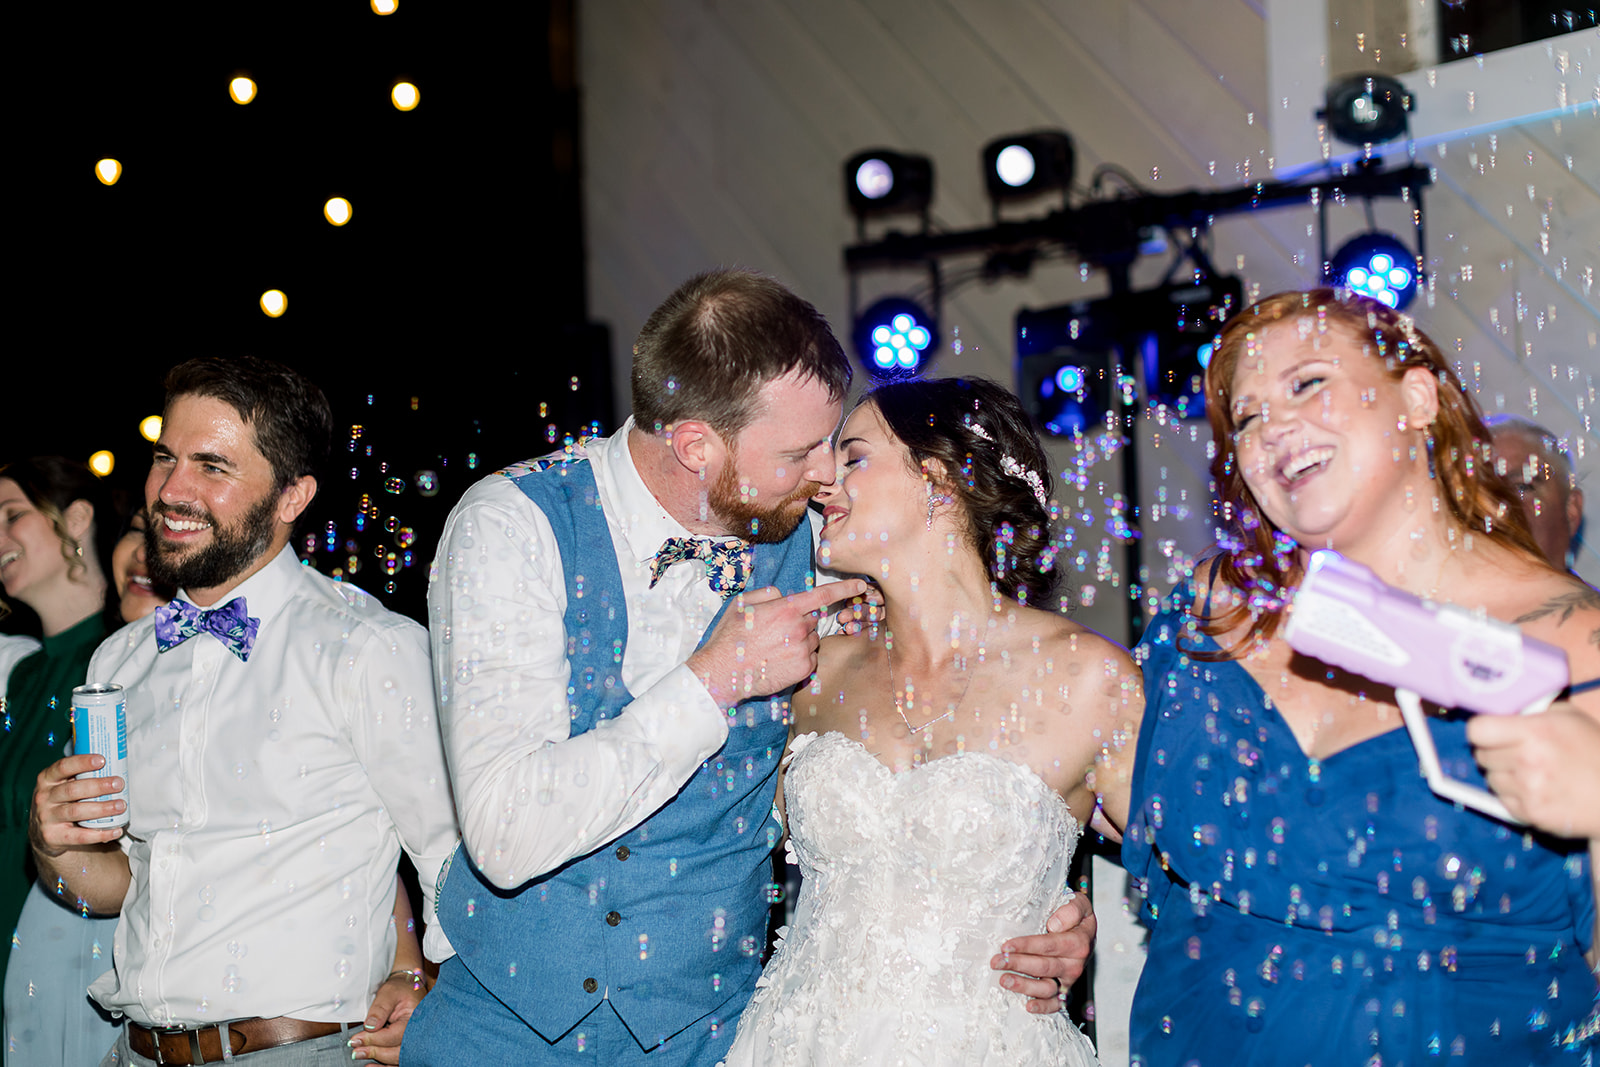 Lifelong friends surround the couple, creating a heartwarming circle of camaraderie on the dance floor